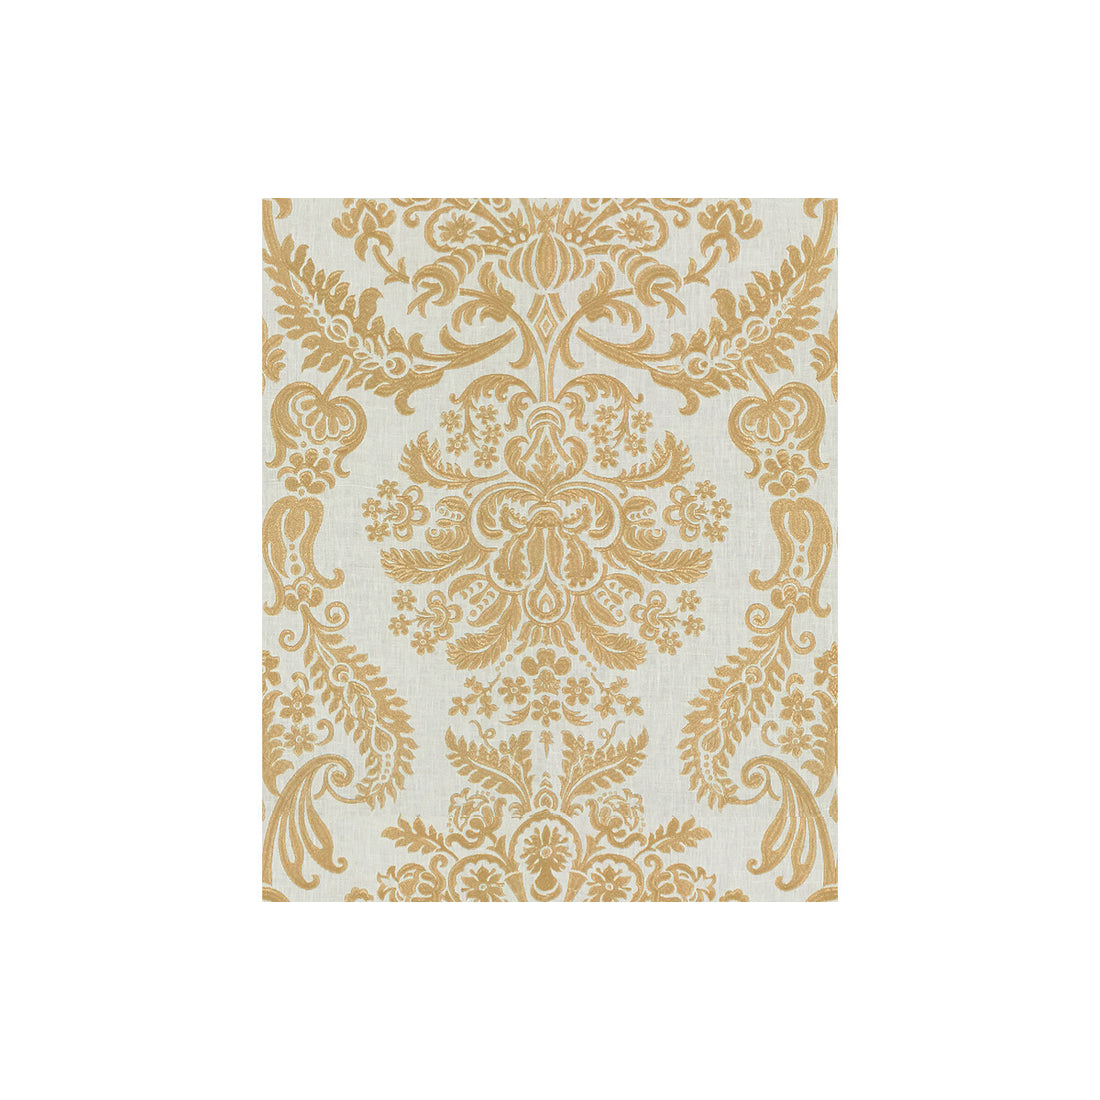 Grand Gesture fabric in white gold color - pattern 33551.4.0 - by Kravet Couture in the Modern Luxe collection